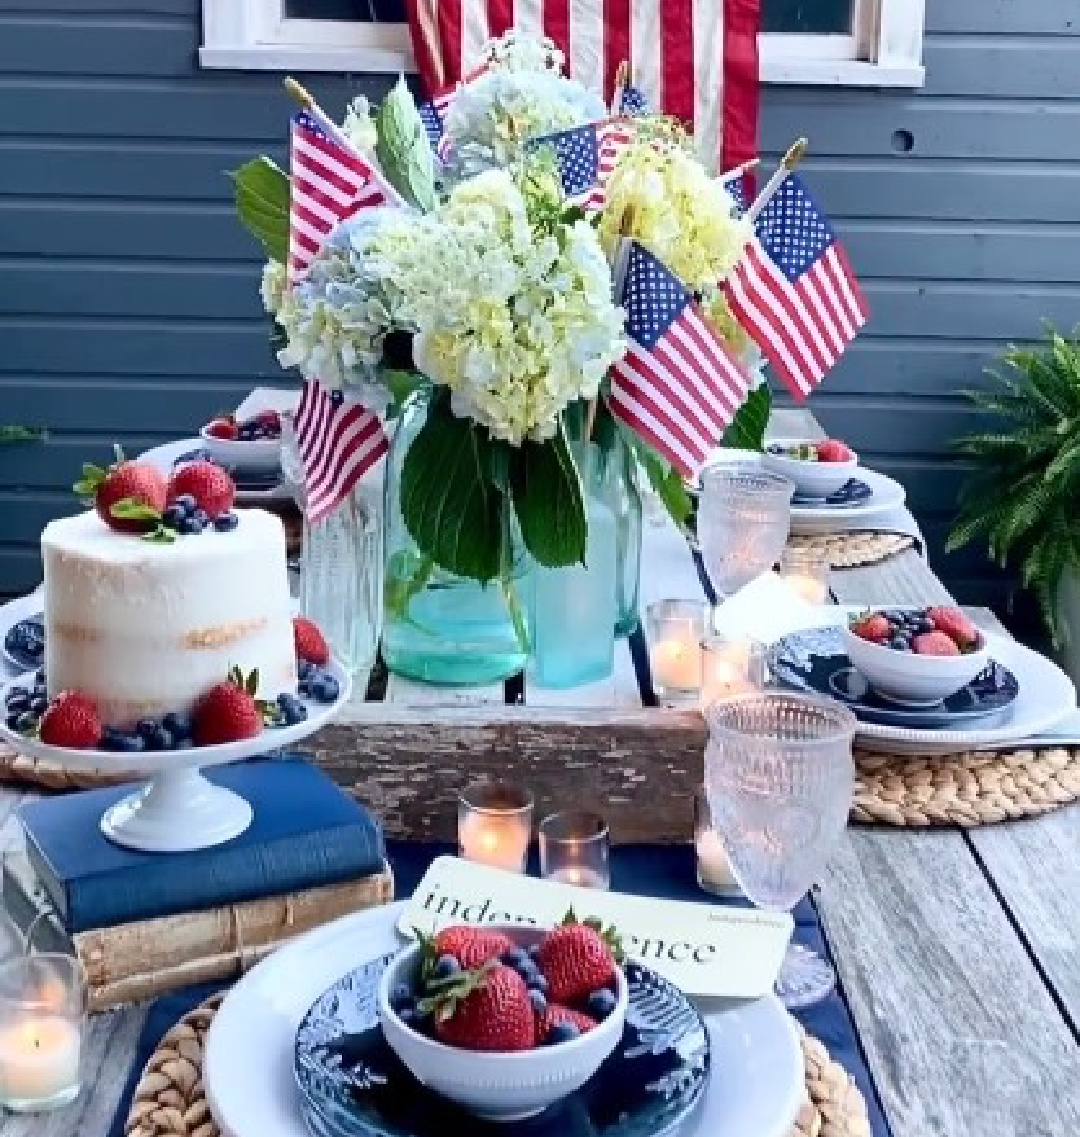 @littlehouseonchestnut - 4th of July tablescape with naked layer cake, hydrangea and American flags, and farmhouse style. #4thofjulytablescape